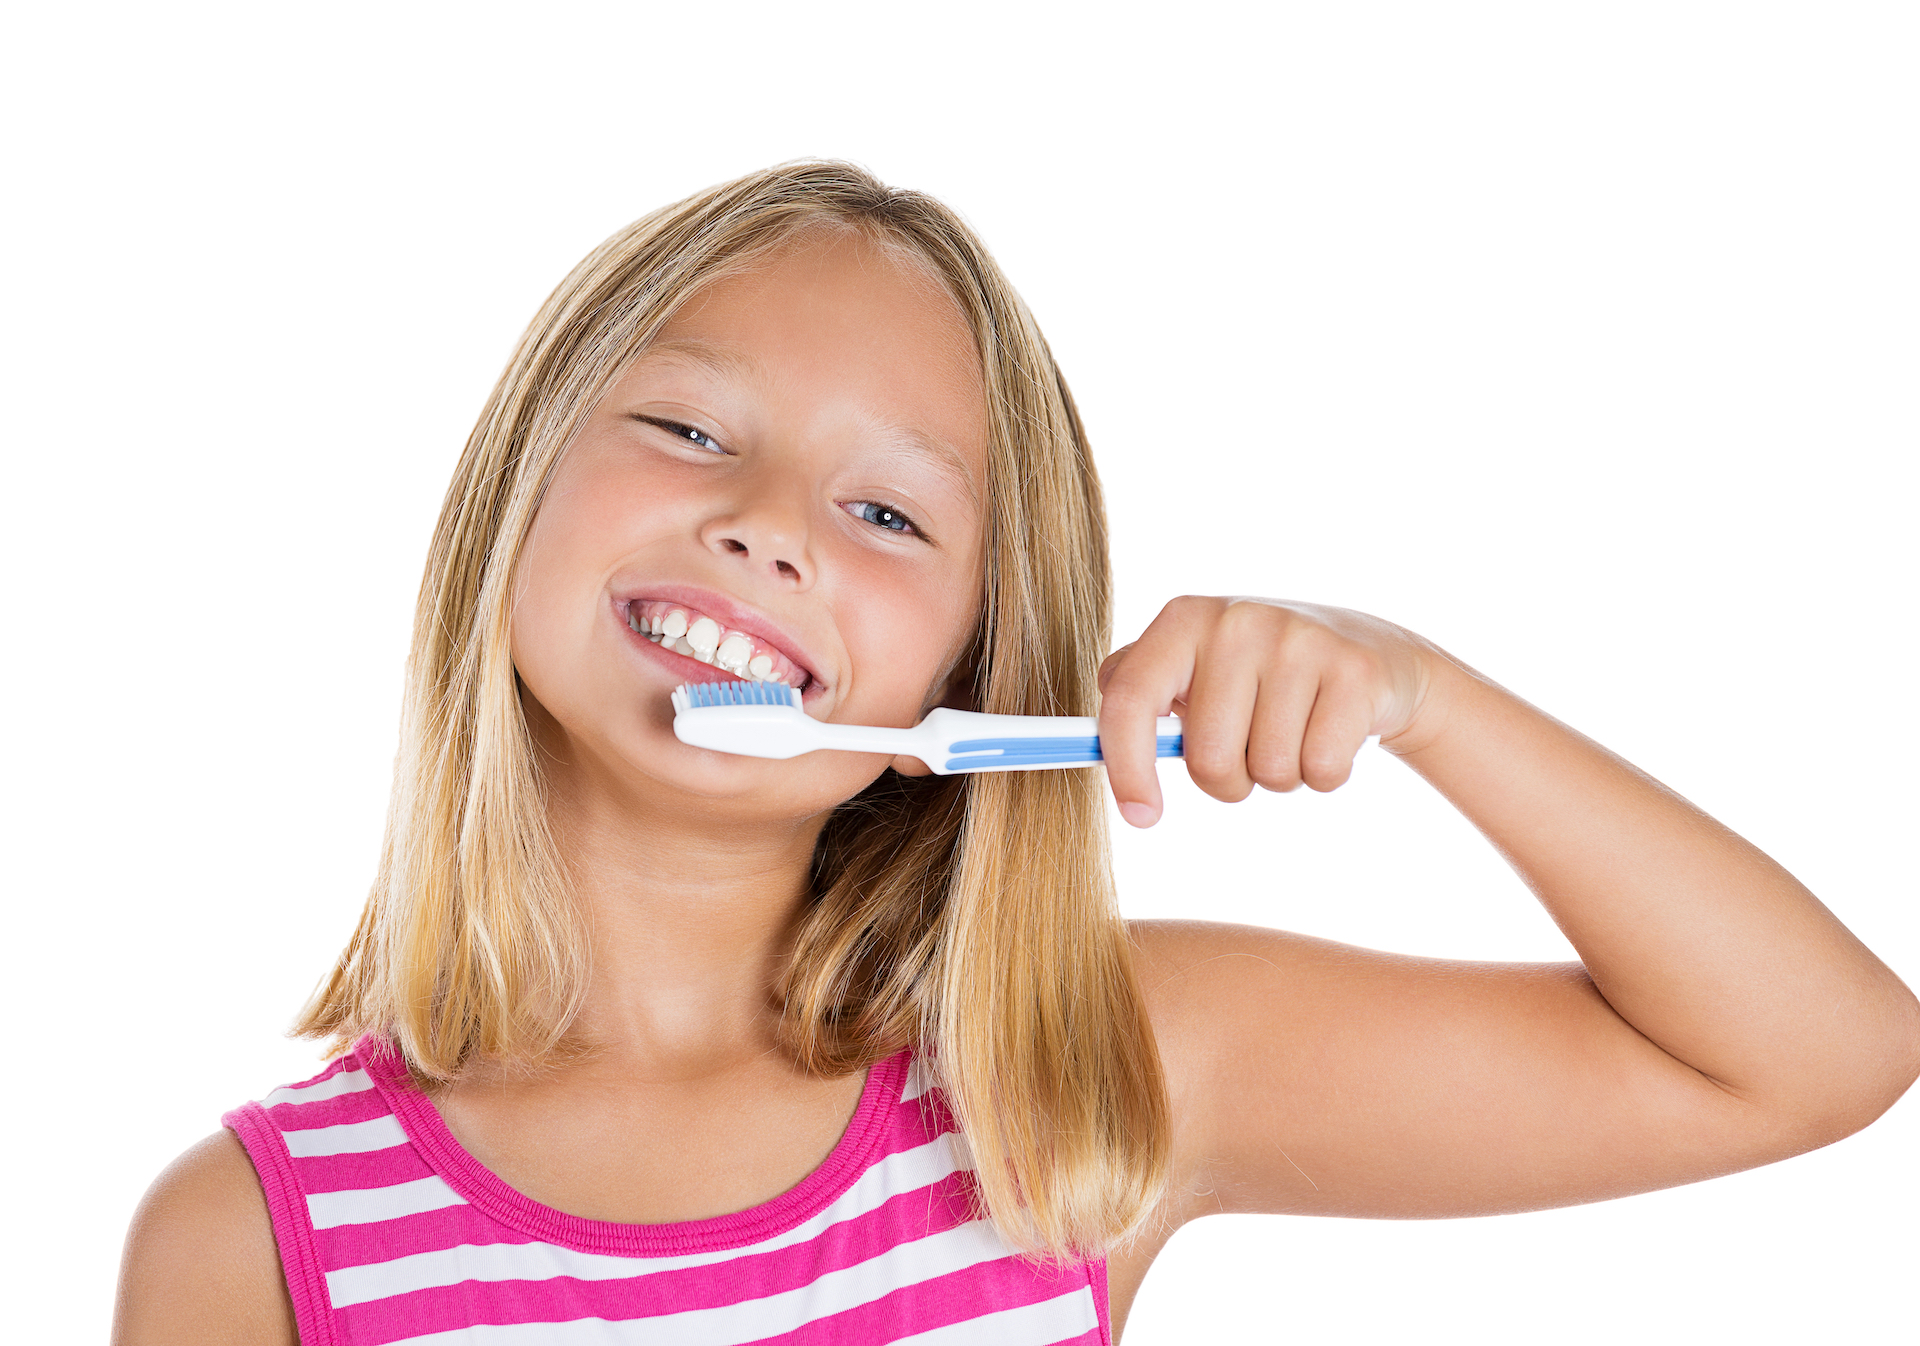 How to Brush Your Teeth With Your Electronic Toothbrush